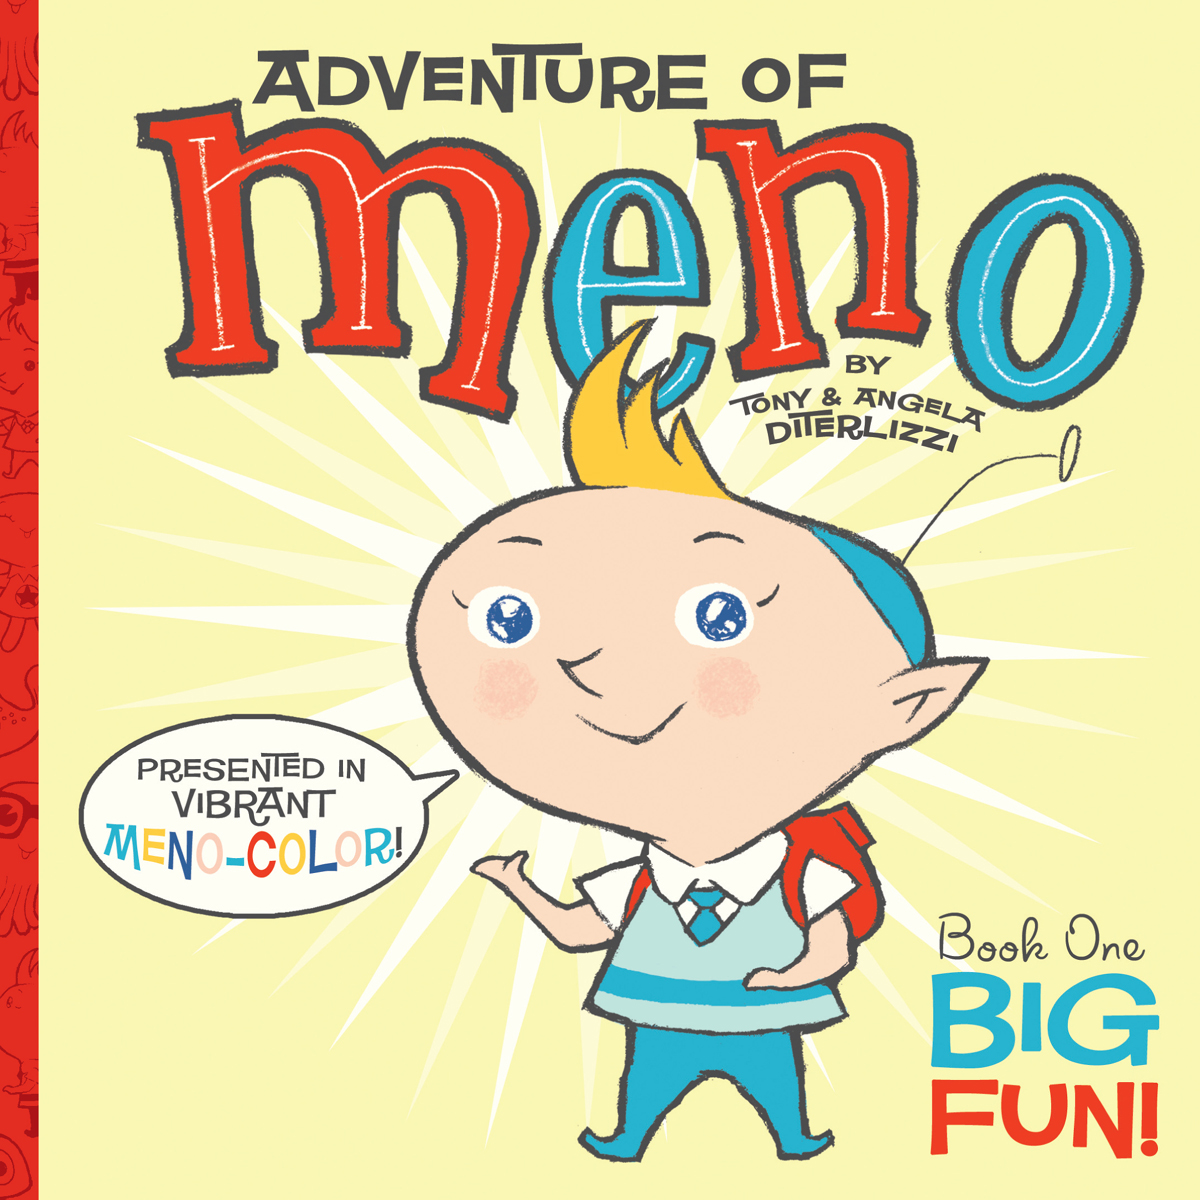 Cover of “Adventure for Meno!” book one